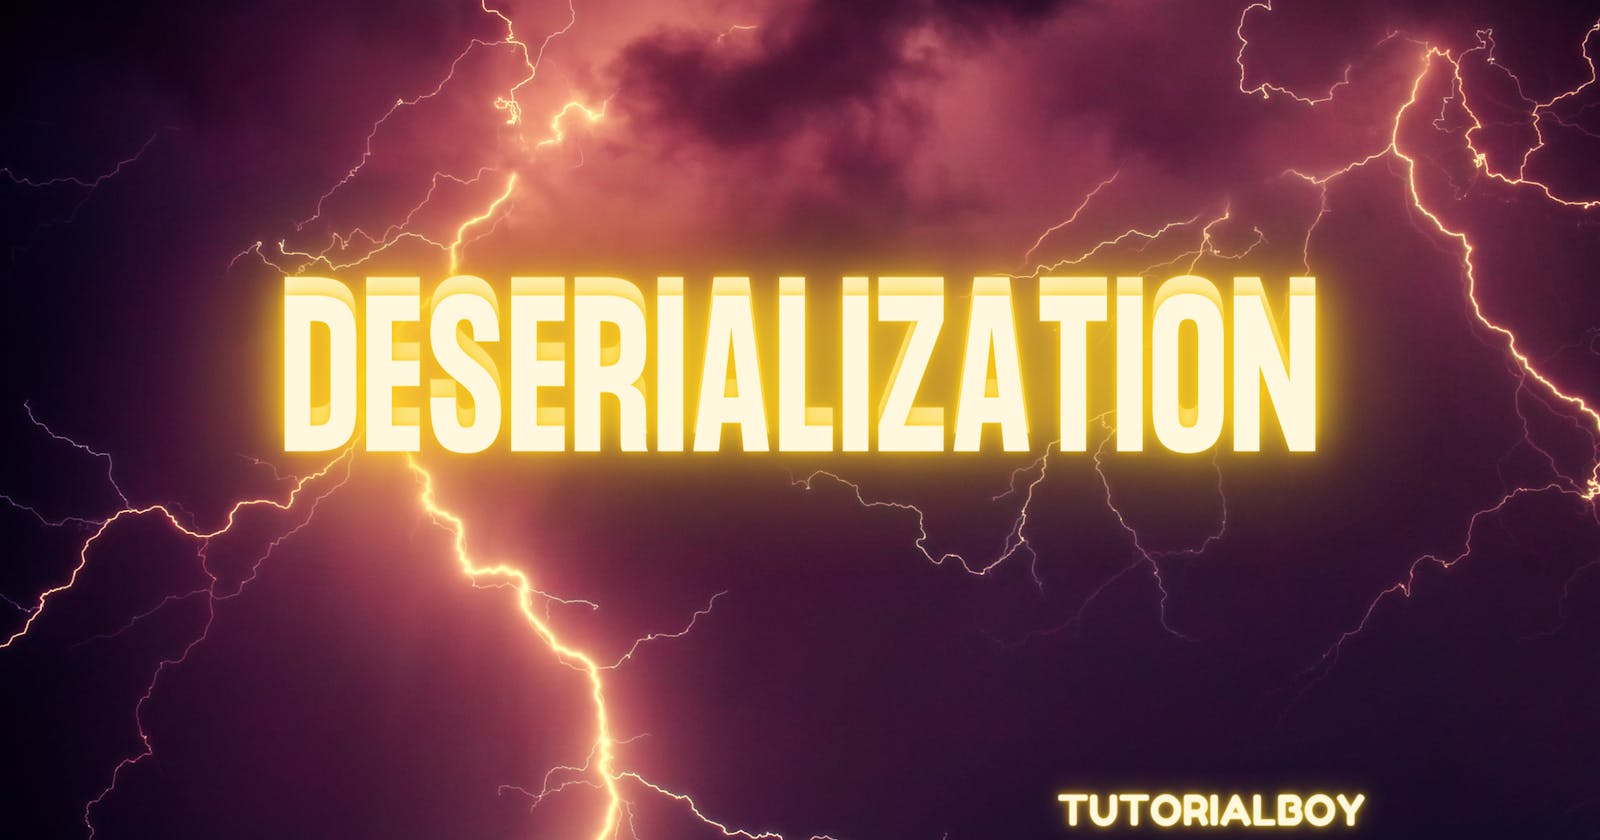 An Unsafe Deserialization Vulnerability and Types of Deserialization